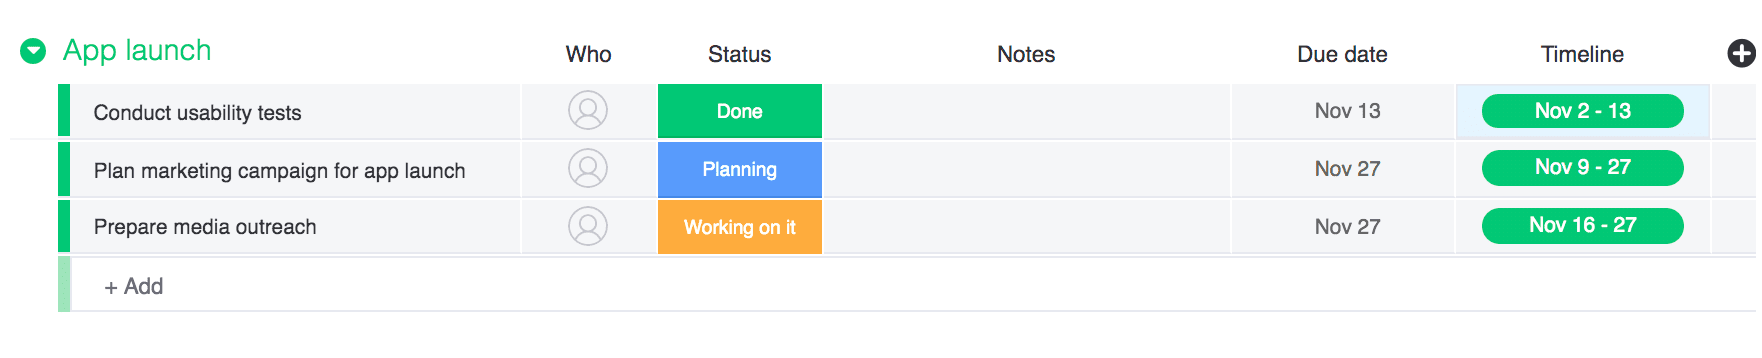 Example of project schedule template on monday.com